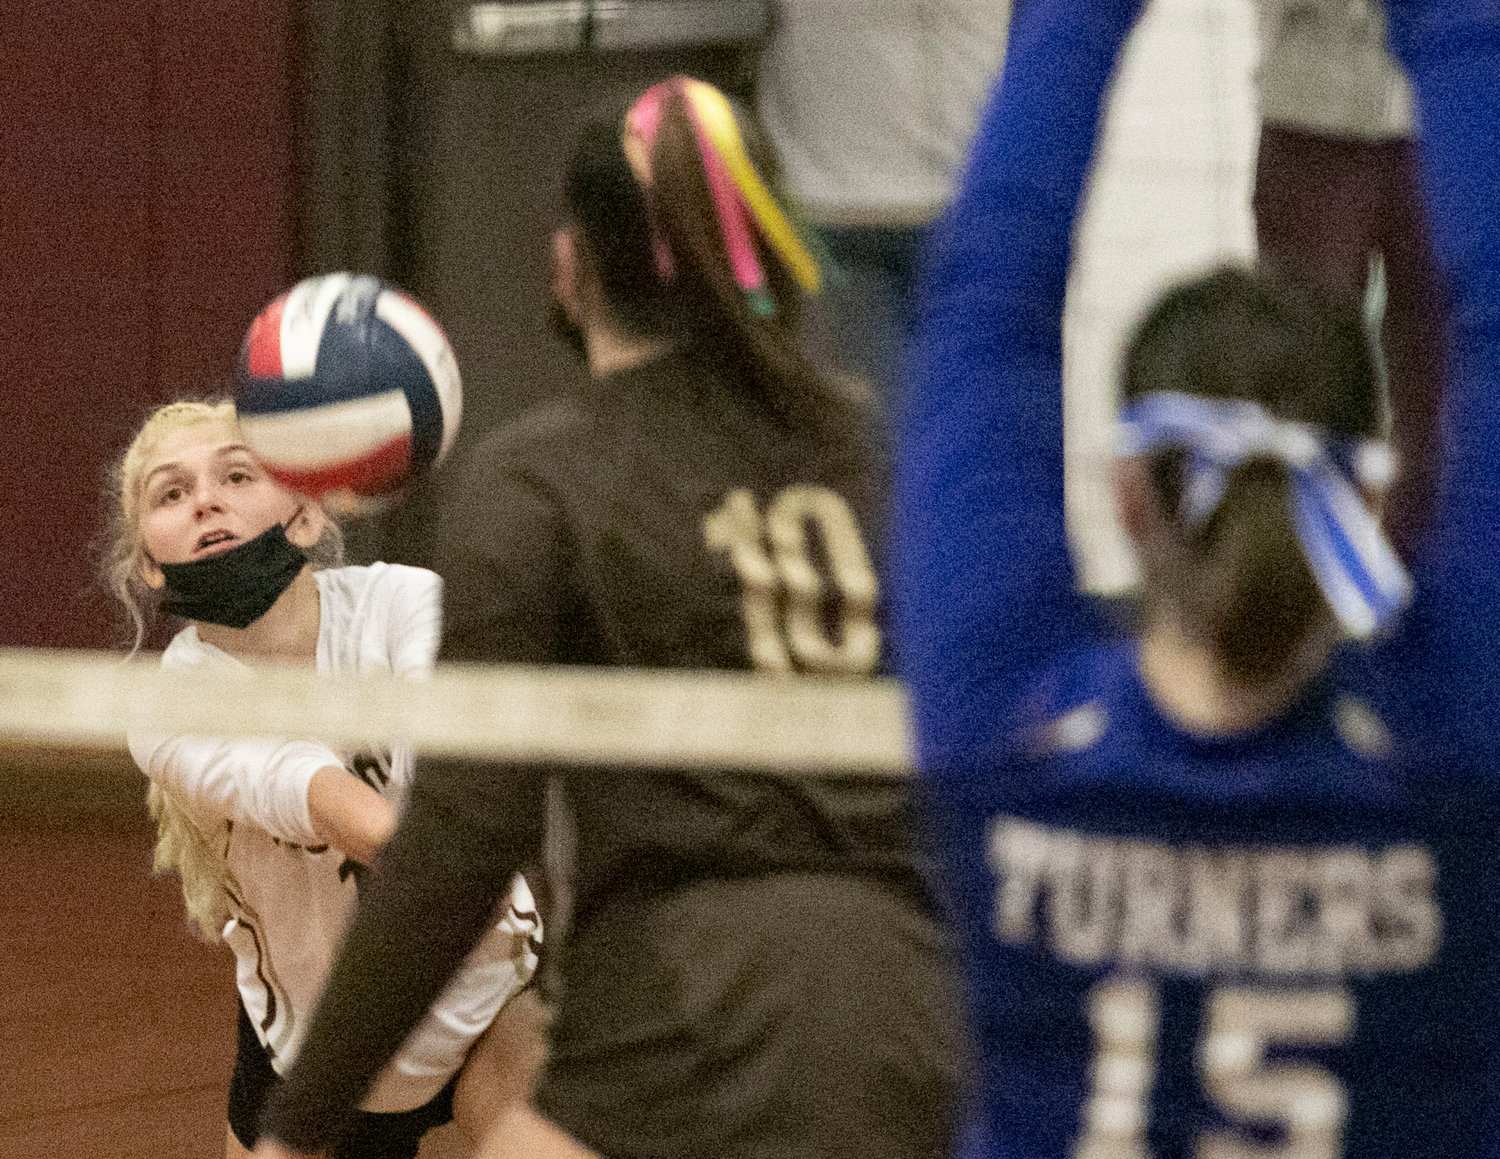 Senior libero Paige Churchill volleys the ball during a game. Churchill led the team defensively, with eight digs.